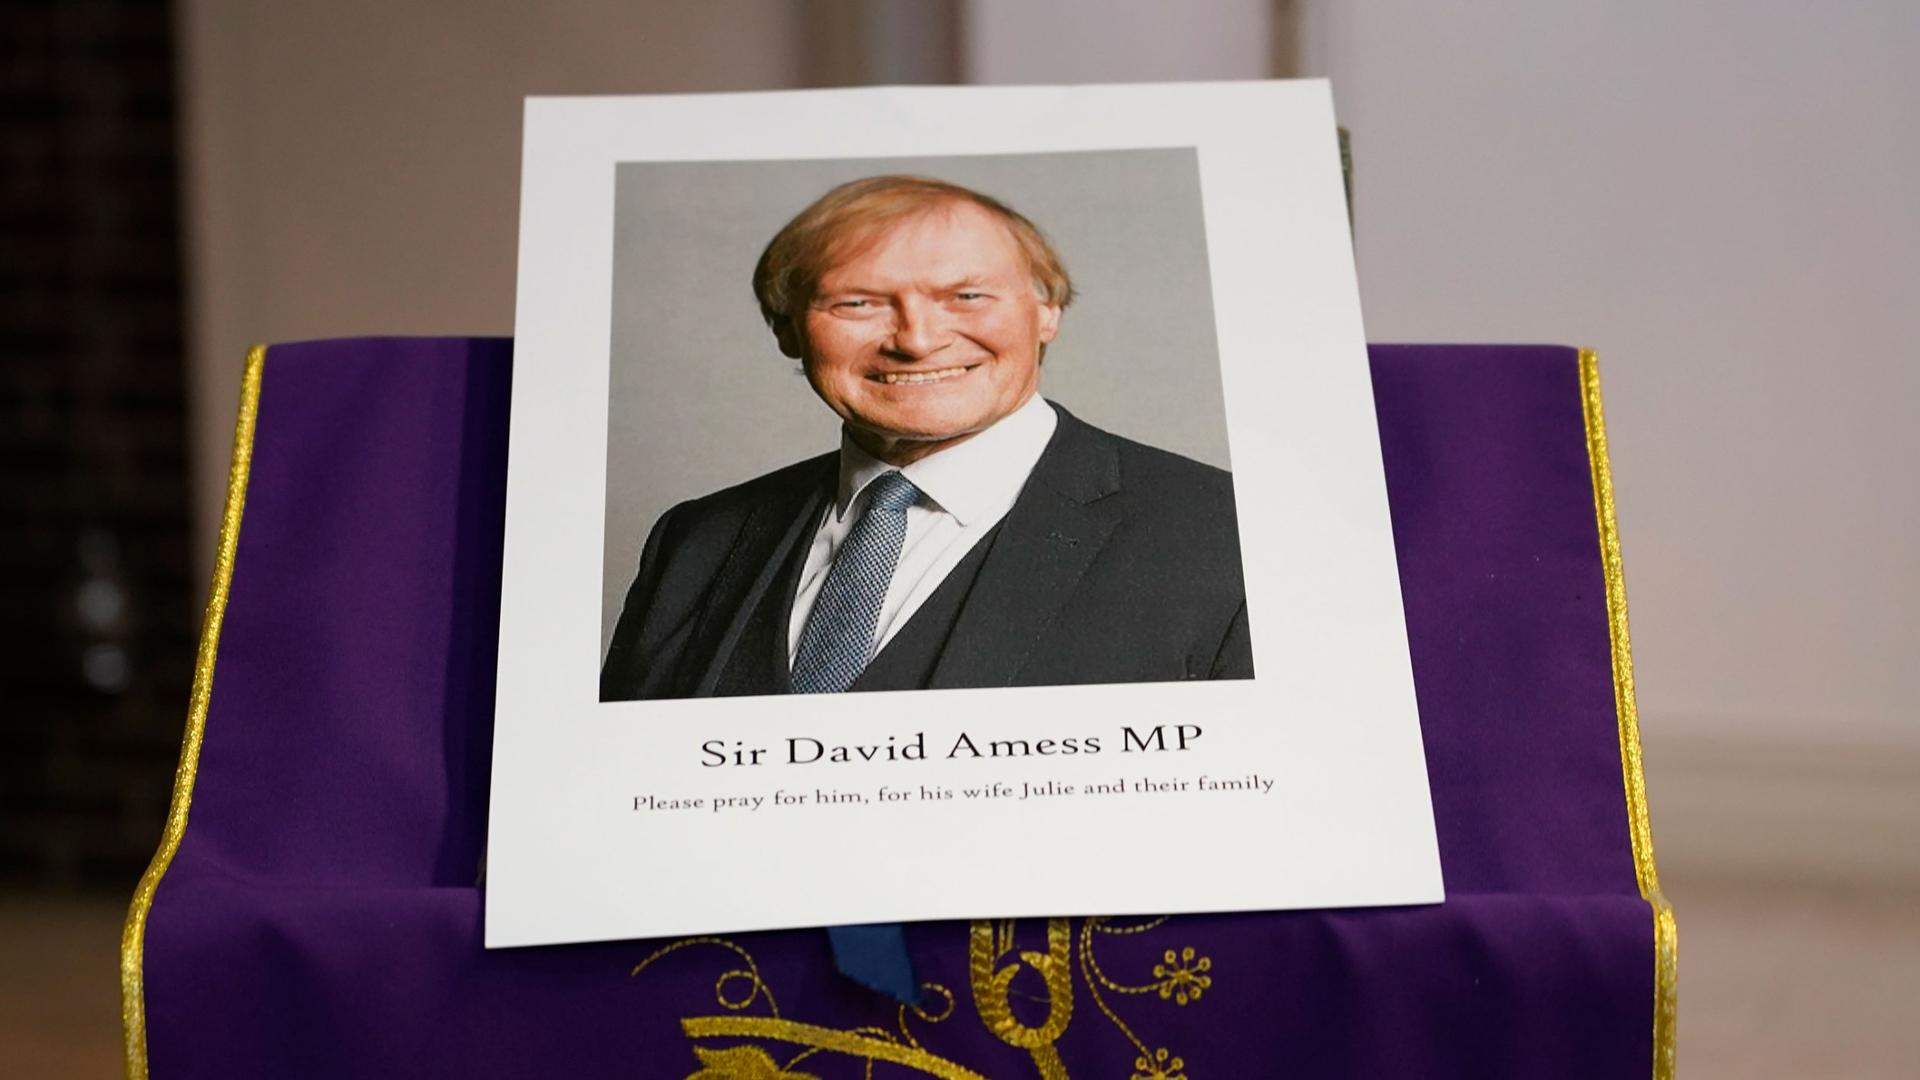 An image of murdered British Conservative lawmaker David Amess is displayed near the altar in St. Peters Catholic Church before a vigil in Leigh-on-Sea, Essex, England, Friday, Oct. 15, 2021.